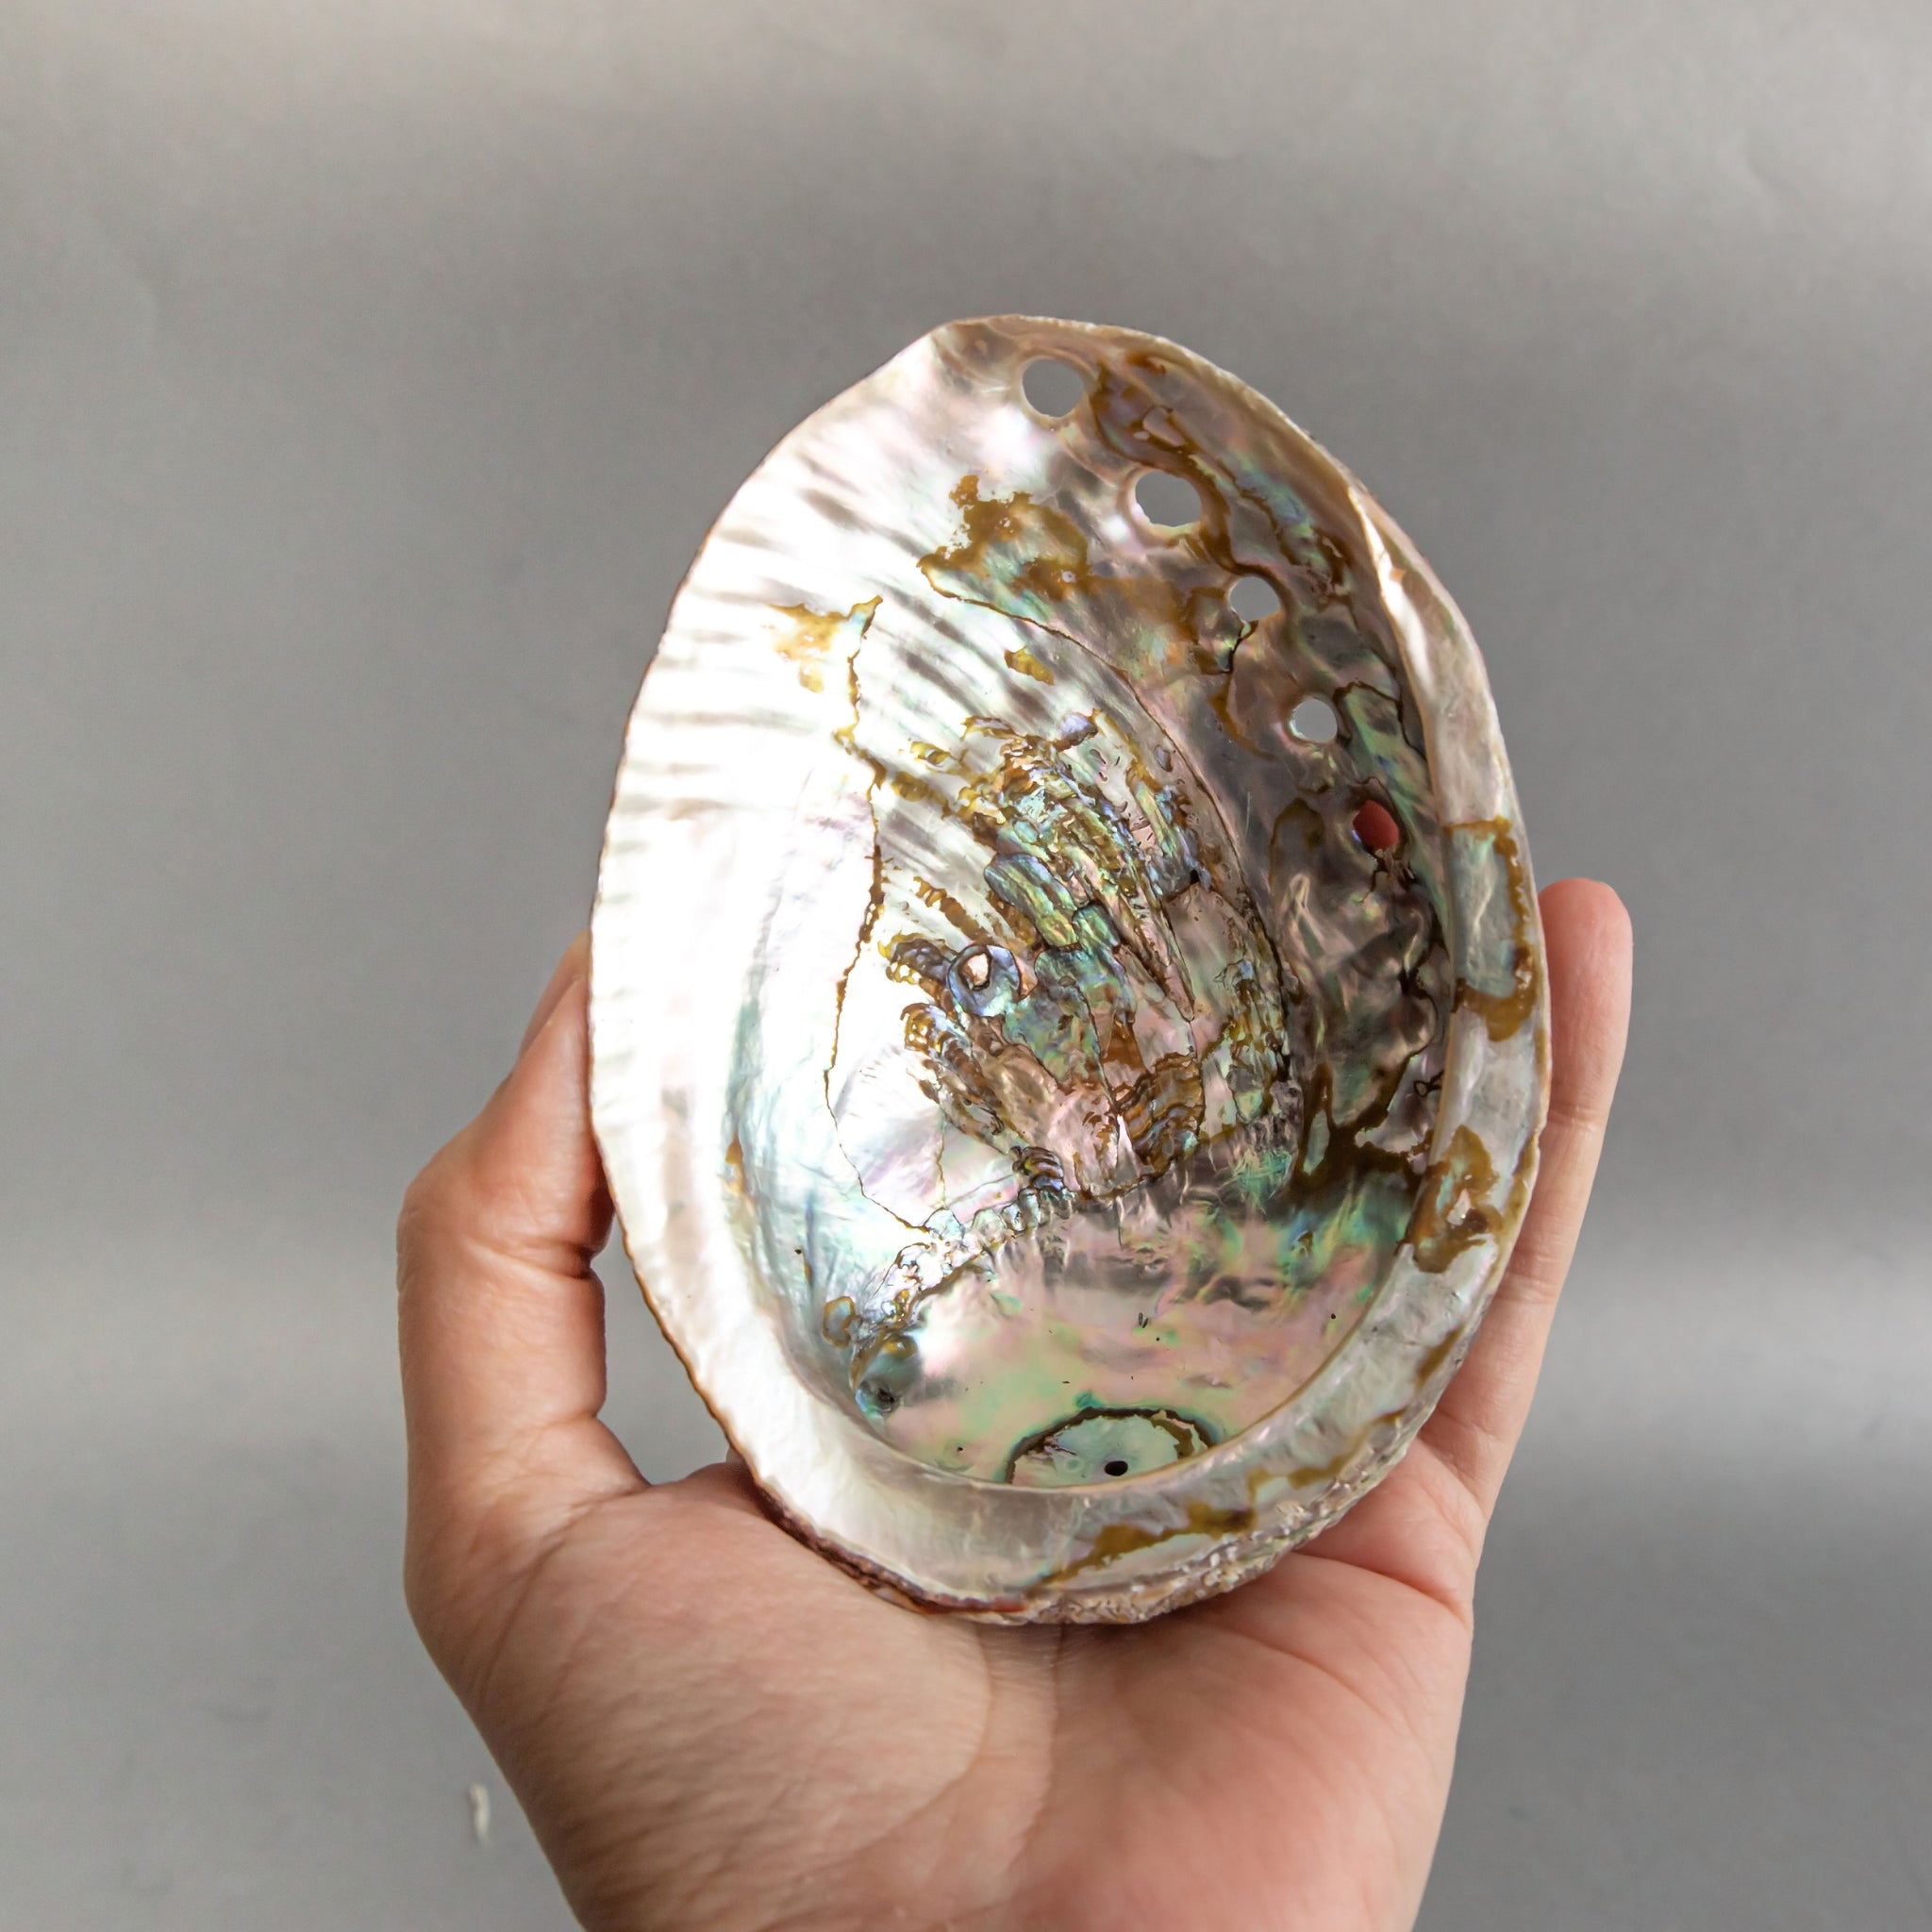 Natural abalone shell, perfect for smoke cleansing and mindfulness rituals. Embrace the soothing power of water element energy. Size may vary by 1-3 cm due to natural materials."